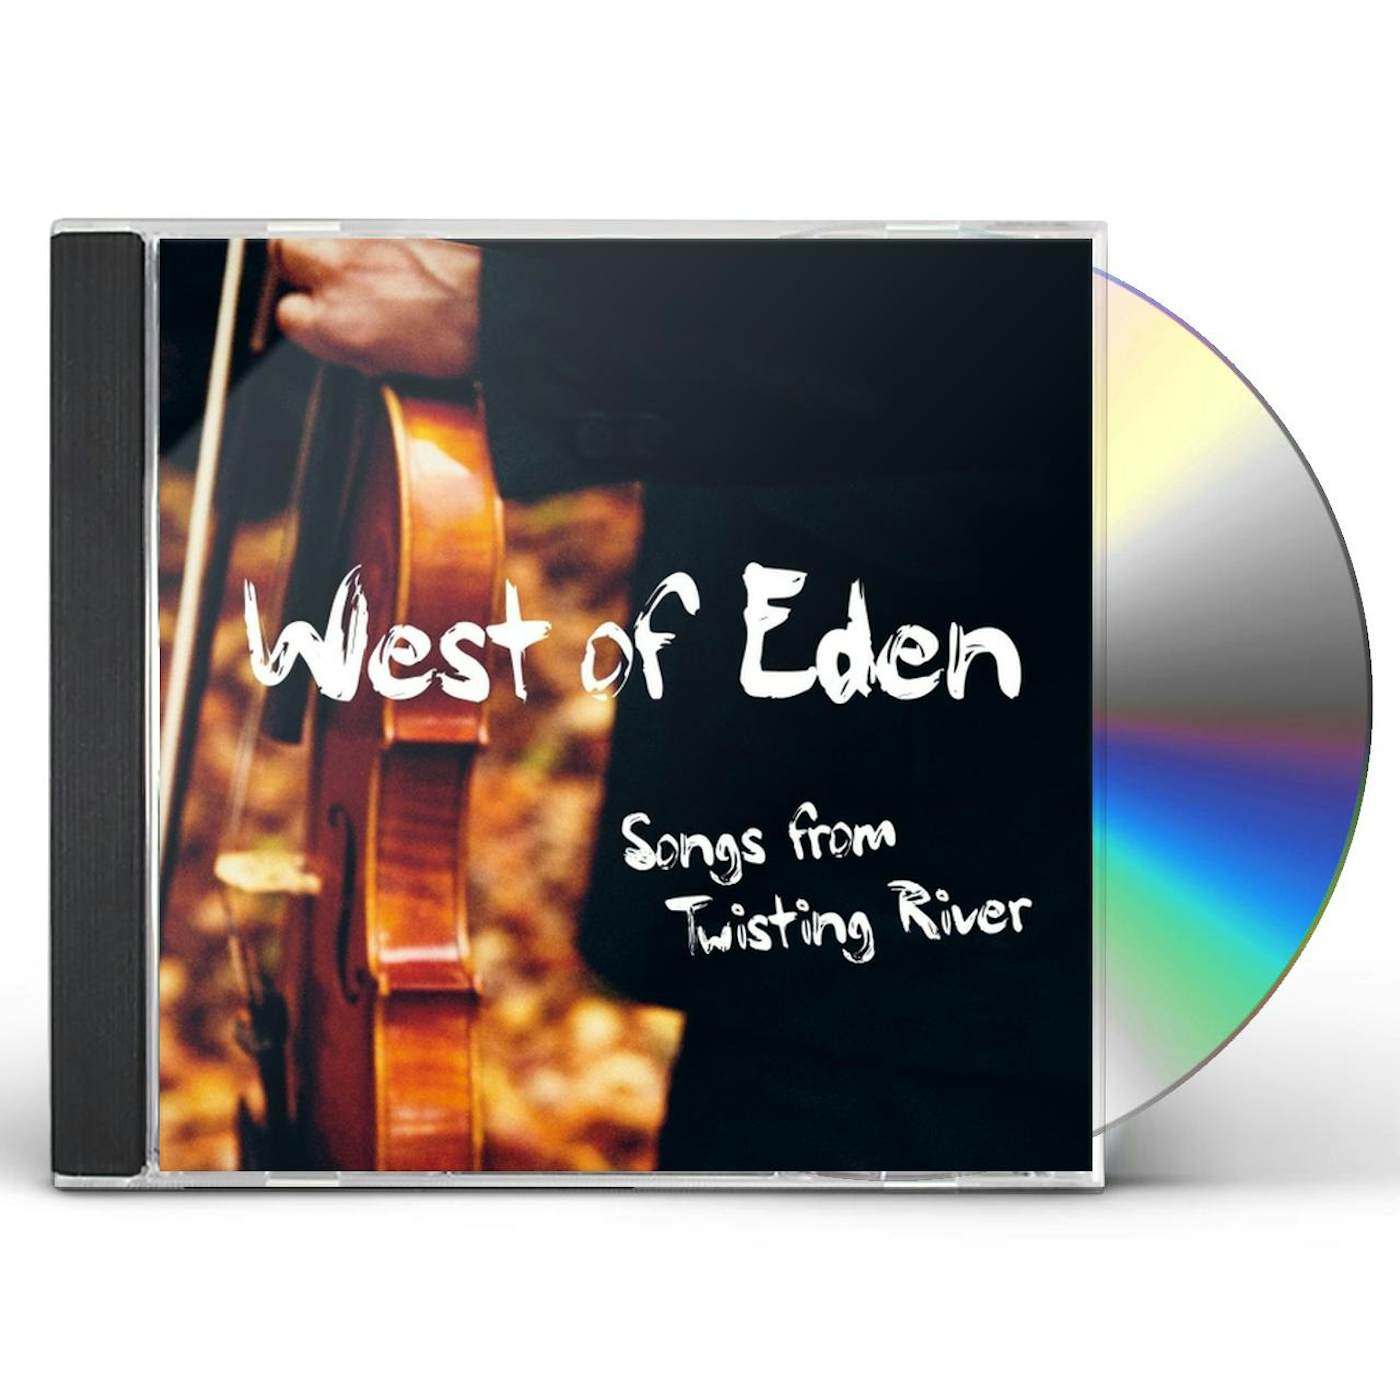 West Of Eden SONGS FROM TWISTING RIVER CD